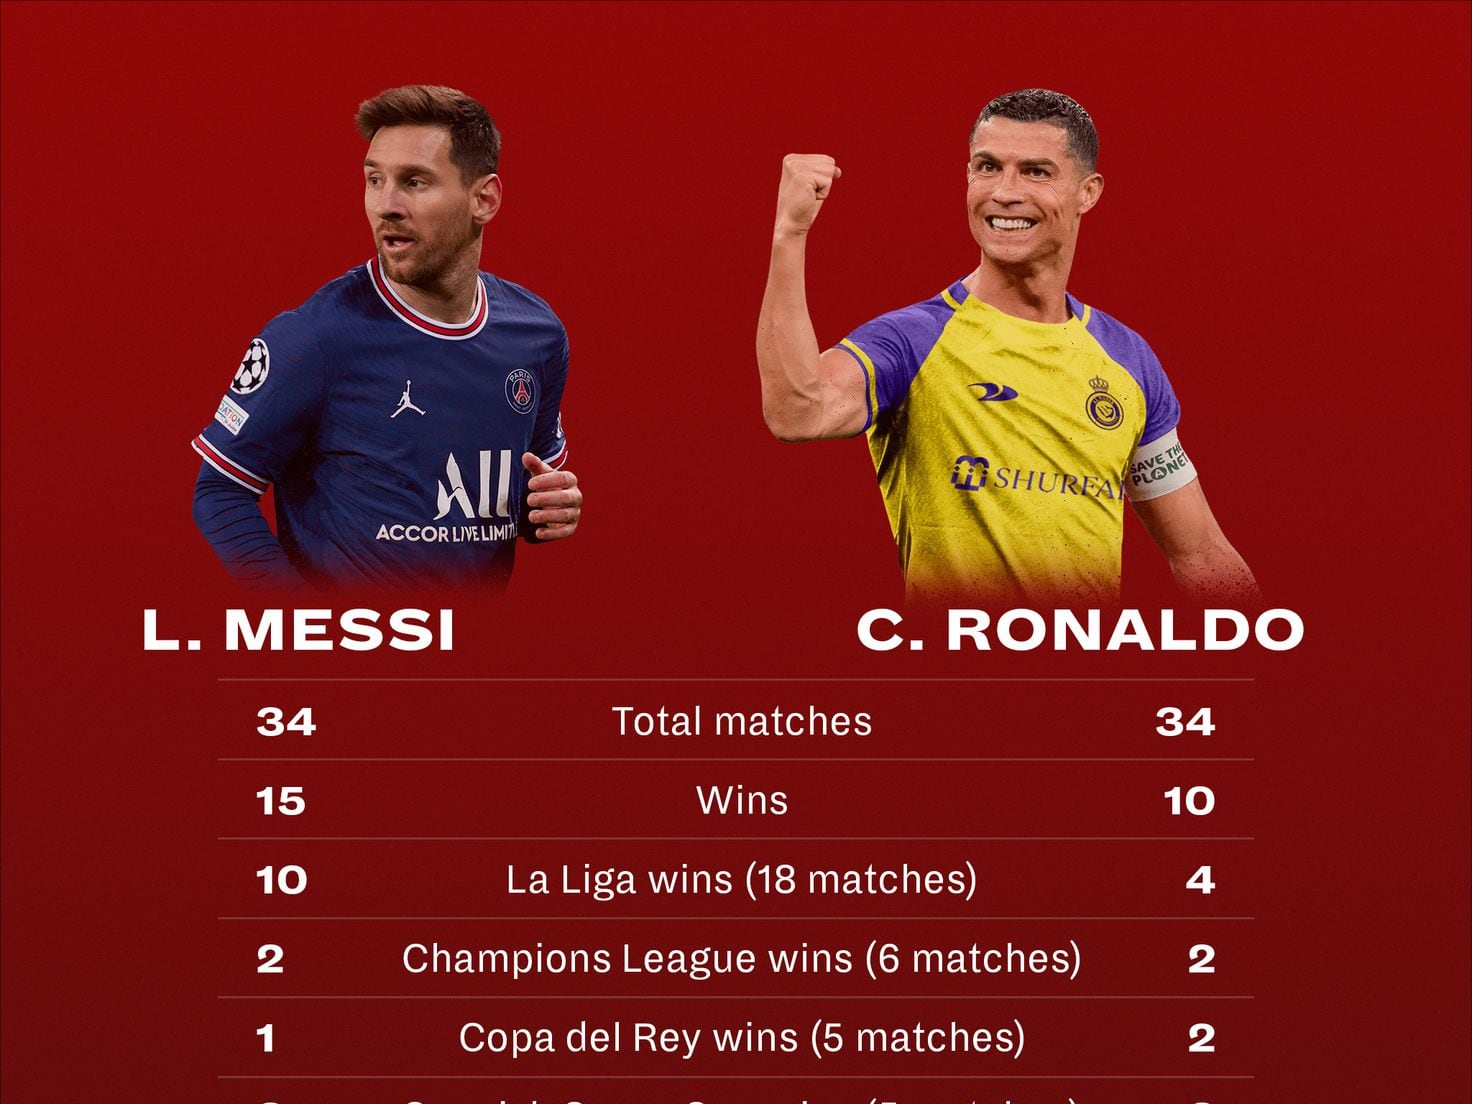 Who is 1 Messi or Ronaldo?